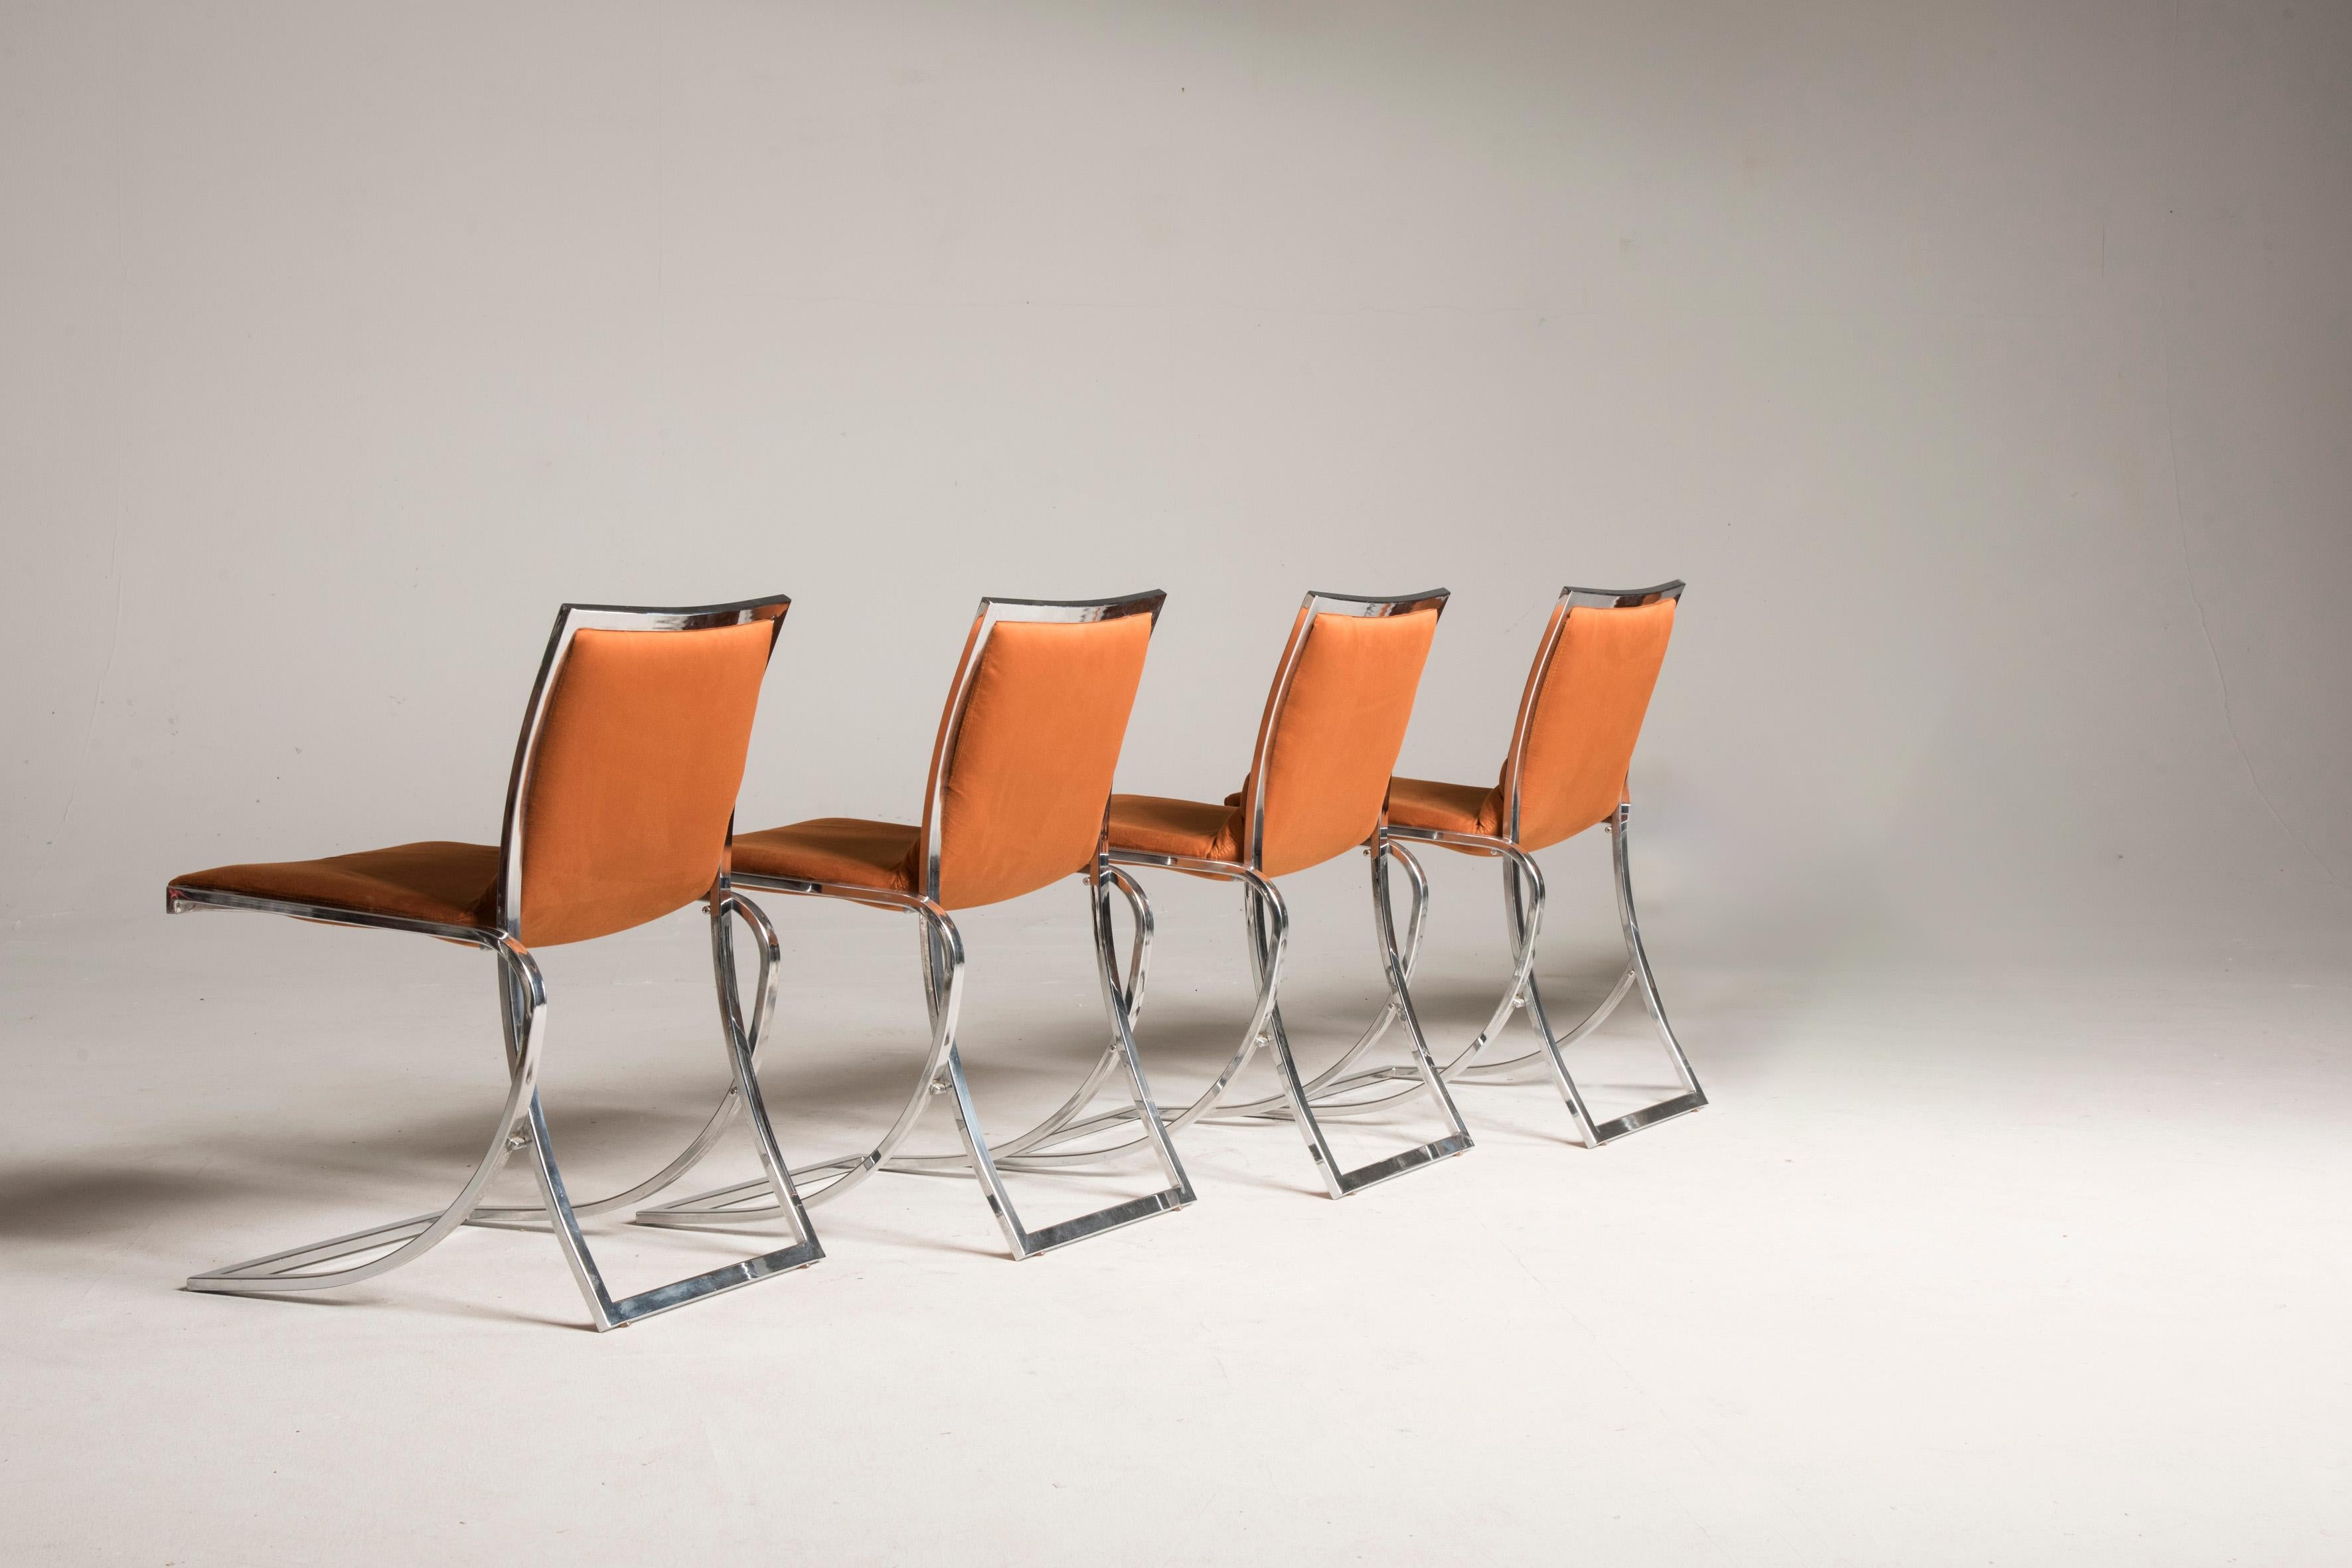 20th Century 1970s Orange Upholstery Chromed Steel Chairs Set of 4 For Sale